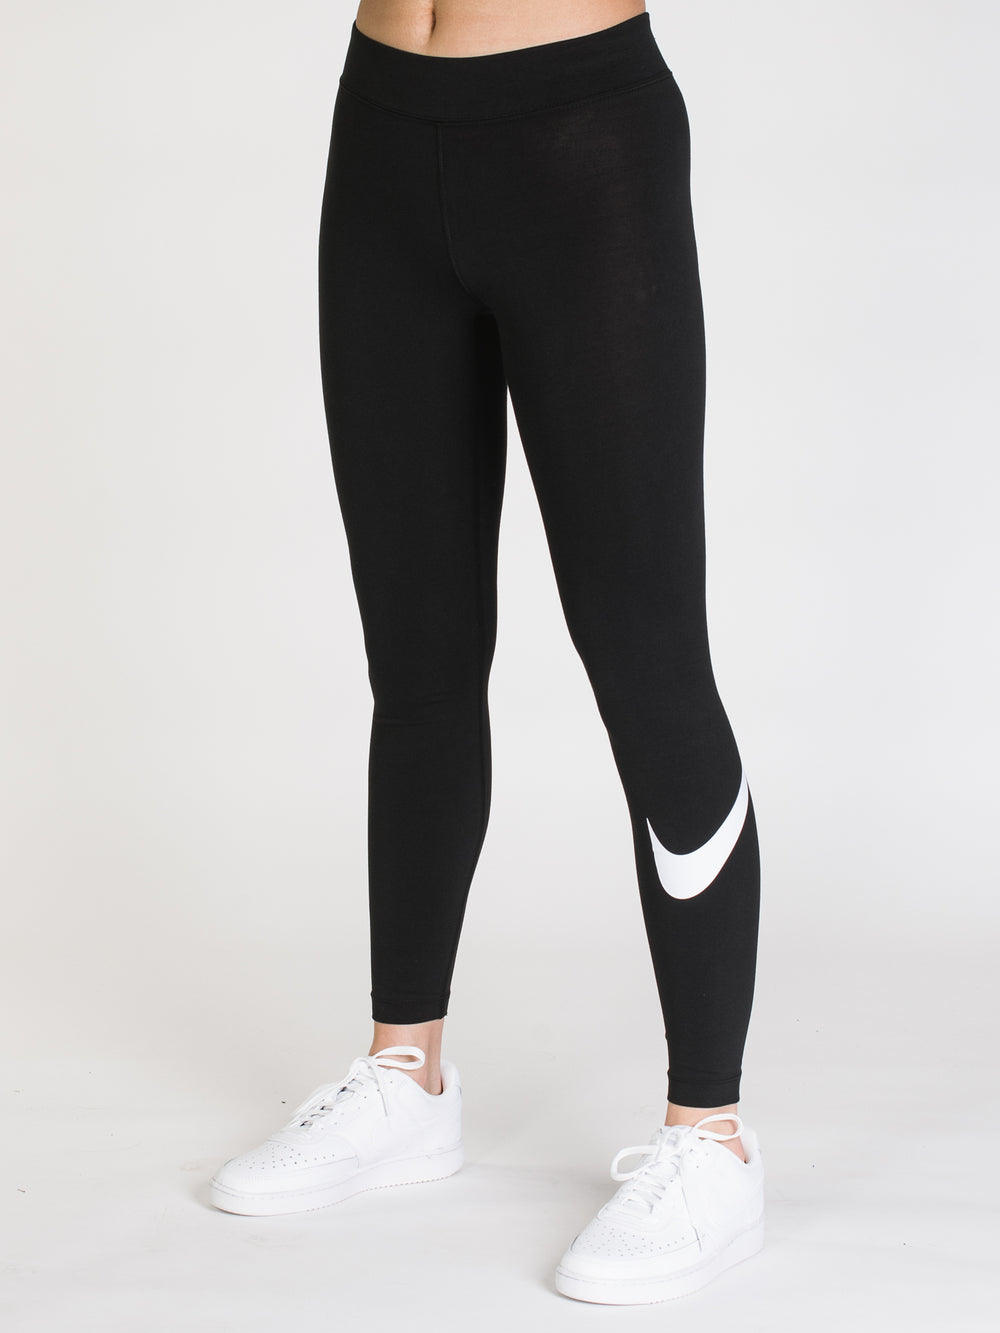 Sports and Leisure :: Sports material and equipment :: Leggings :: Sport  leggings for Women Nike CZ8534 010 Black